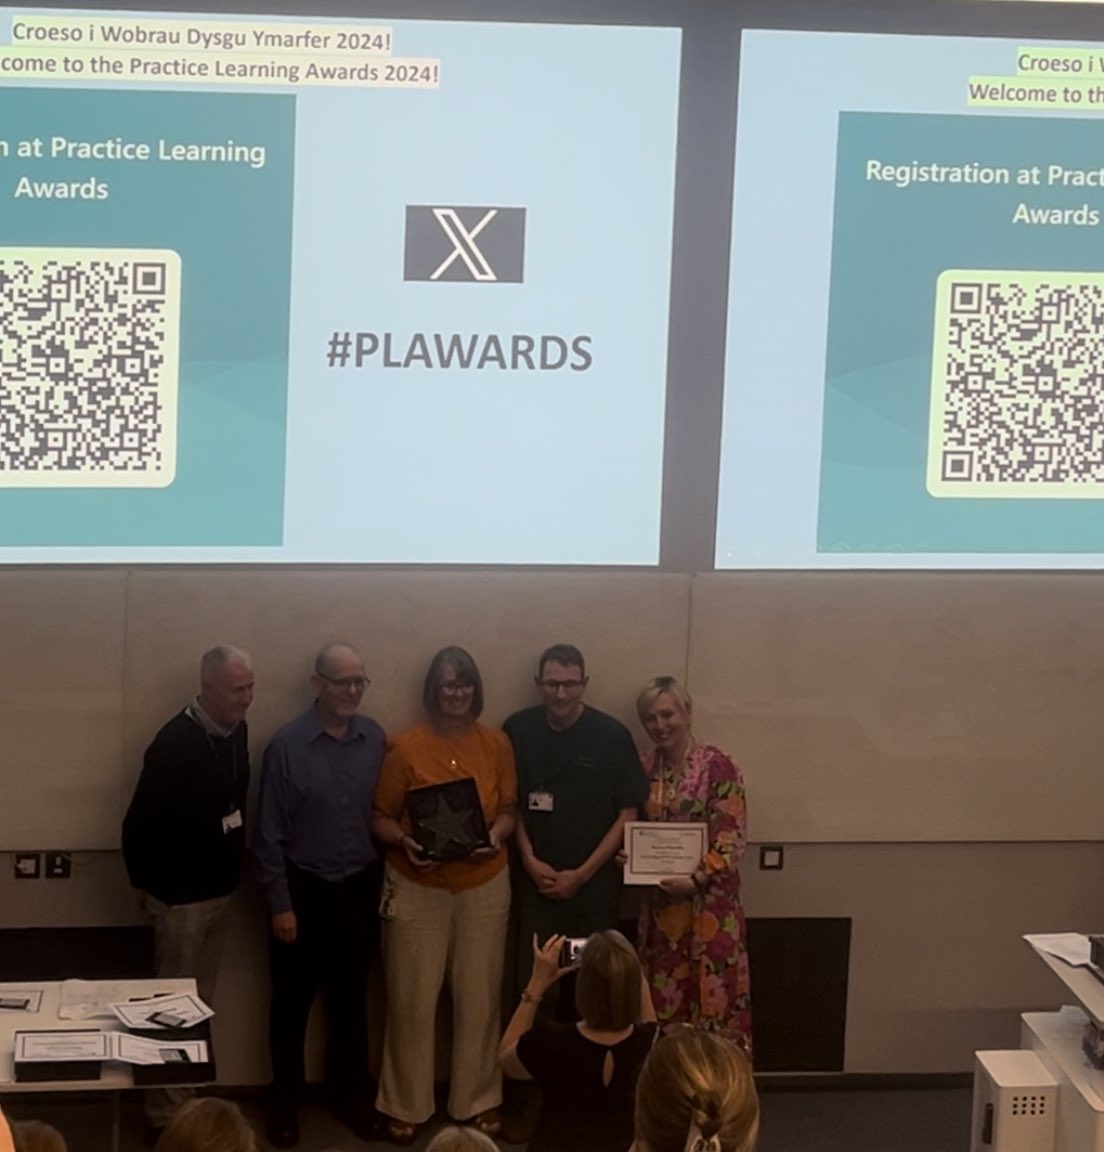 Very proud of our very own @EAMD_CAV HCSW education team for winning the ‘ Clinical Team: HCSW Education Award’ @CV_UHB Practice Learning Awards. Well done ☺️. @CAV_ECOD @jem890 @Jas_Roberts10 @RachelGidman @emmasimpkins10